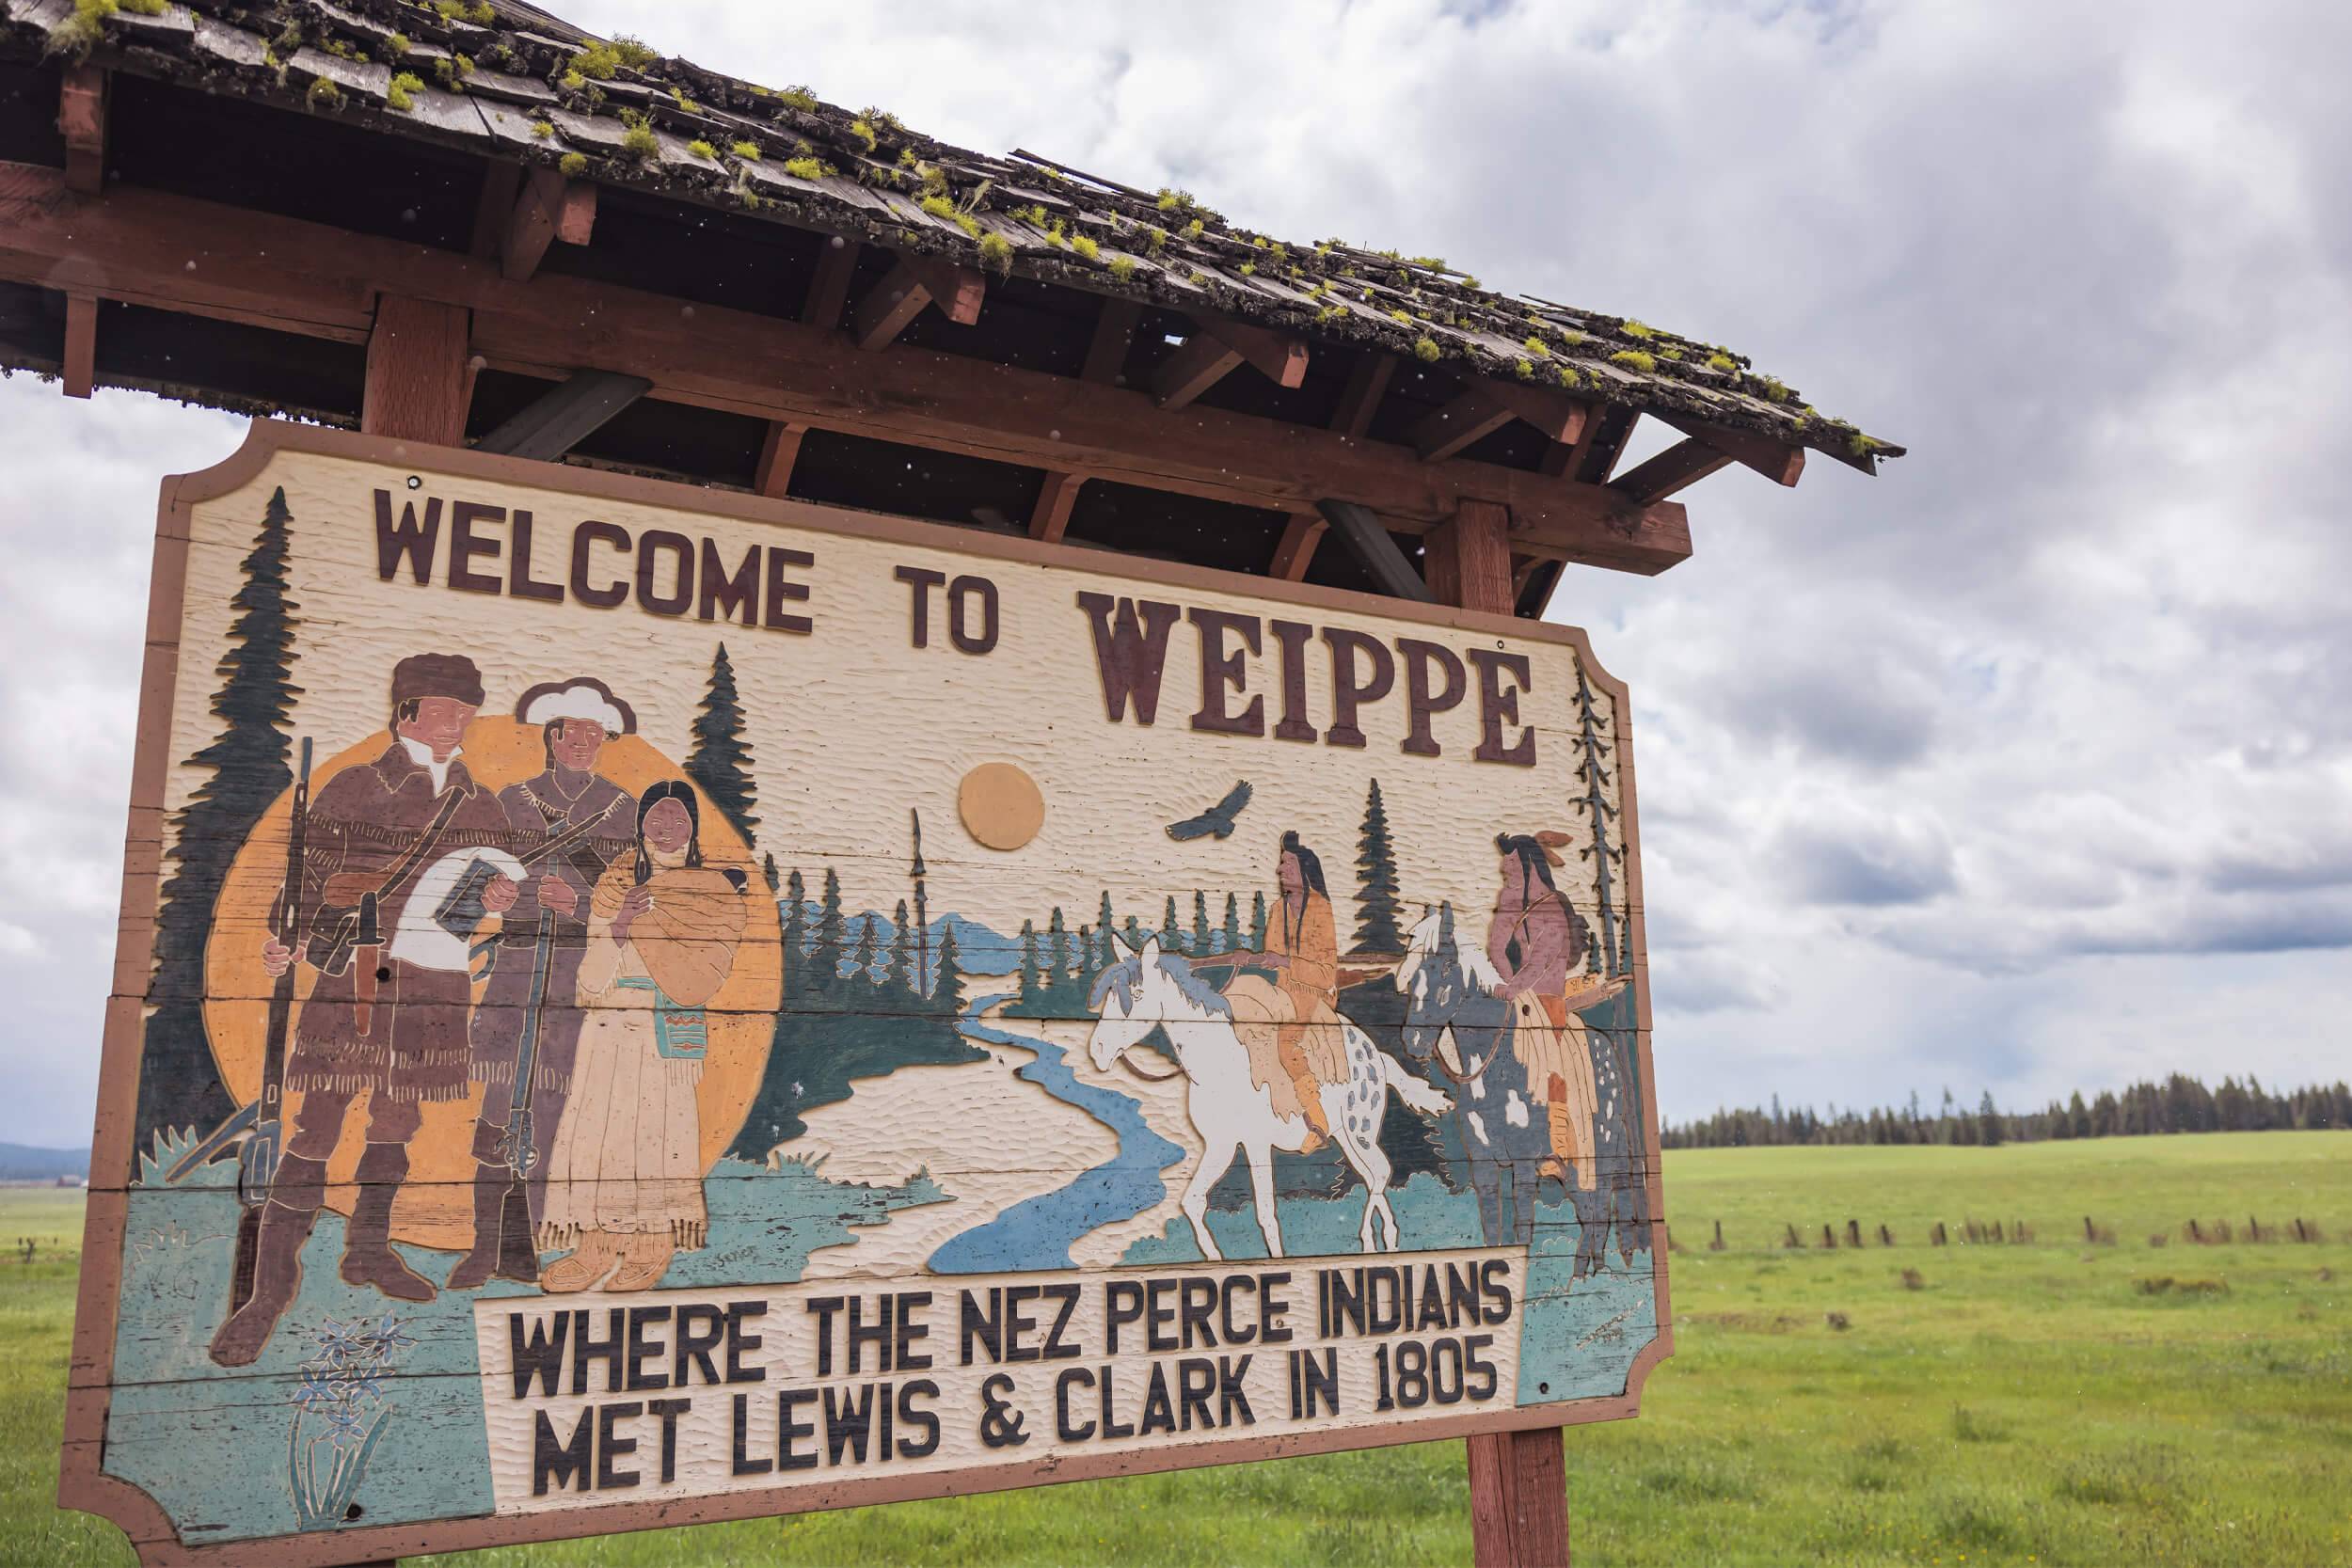 A welcome sign for the town of Weippe.